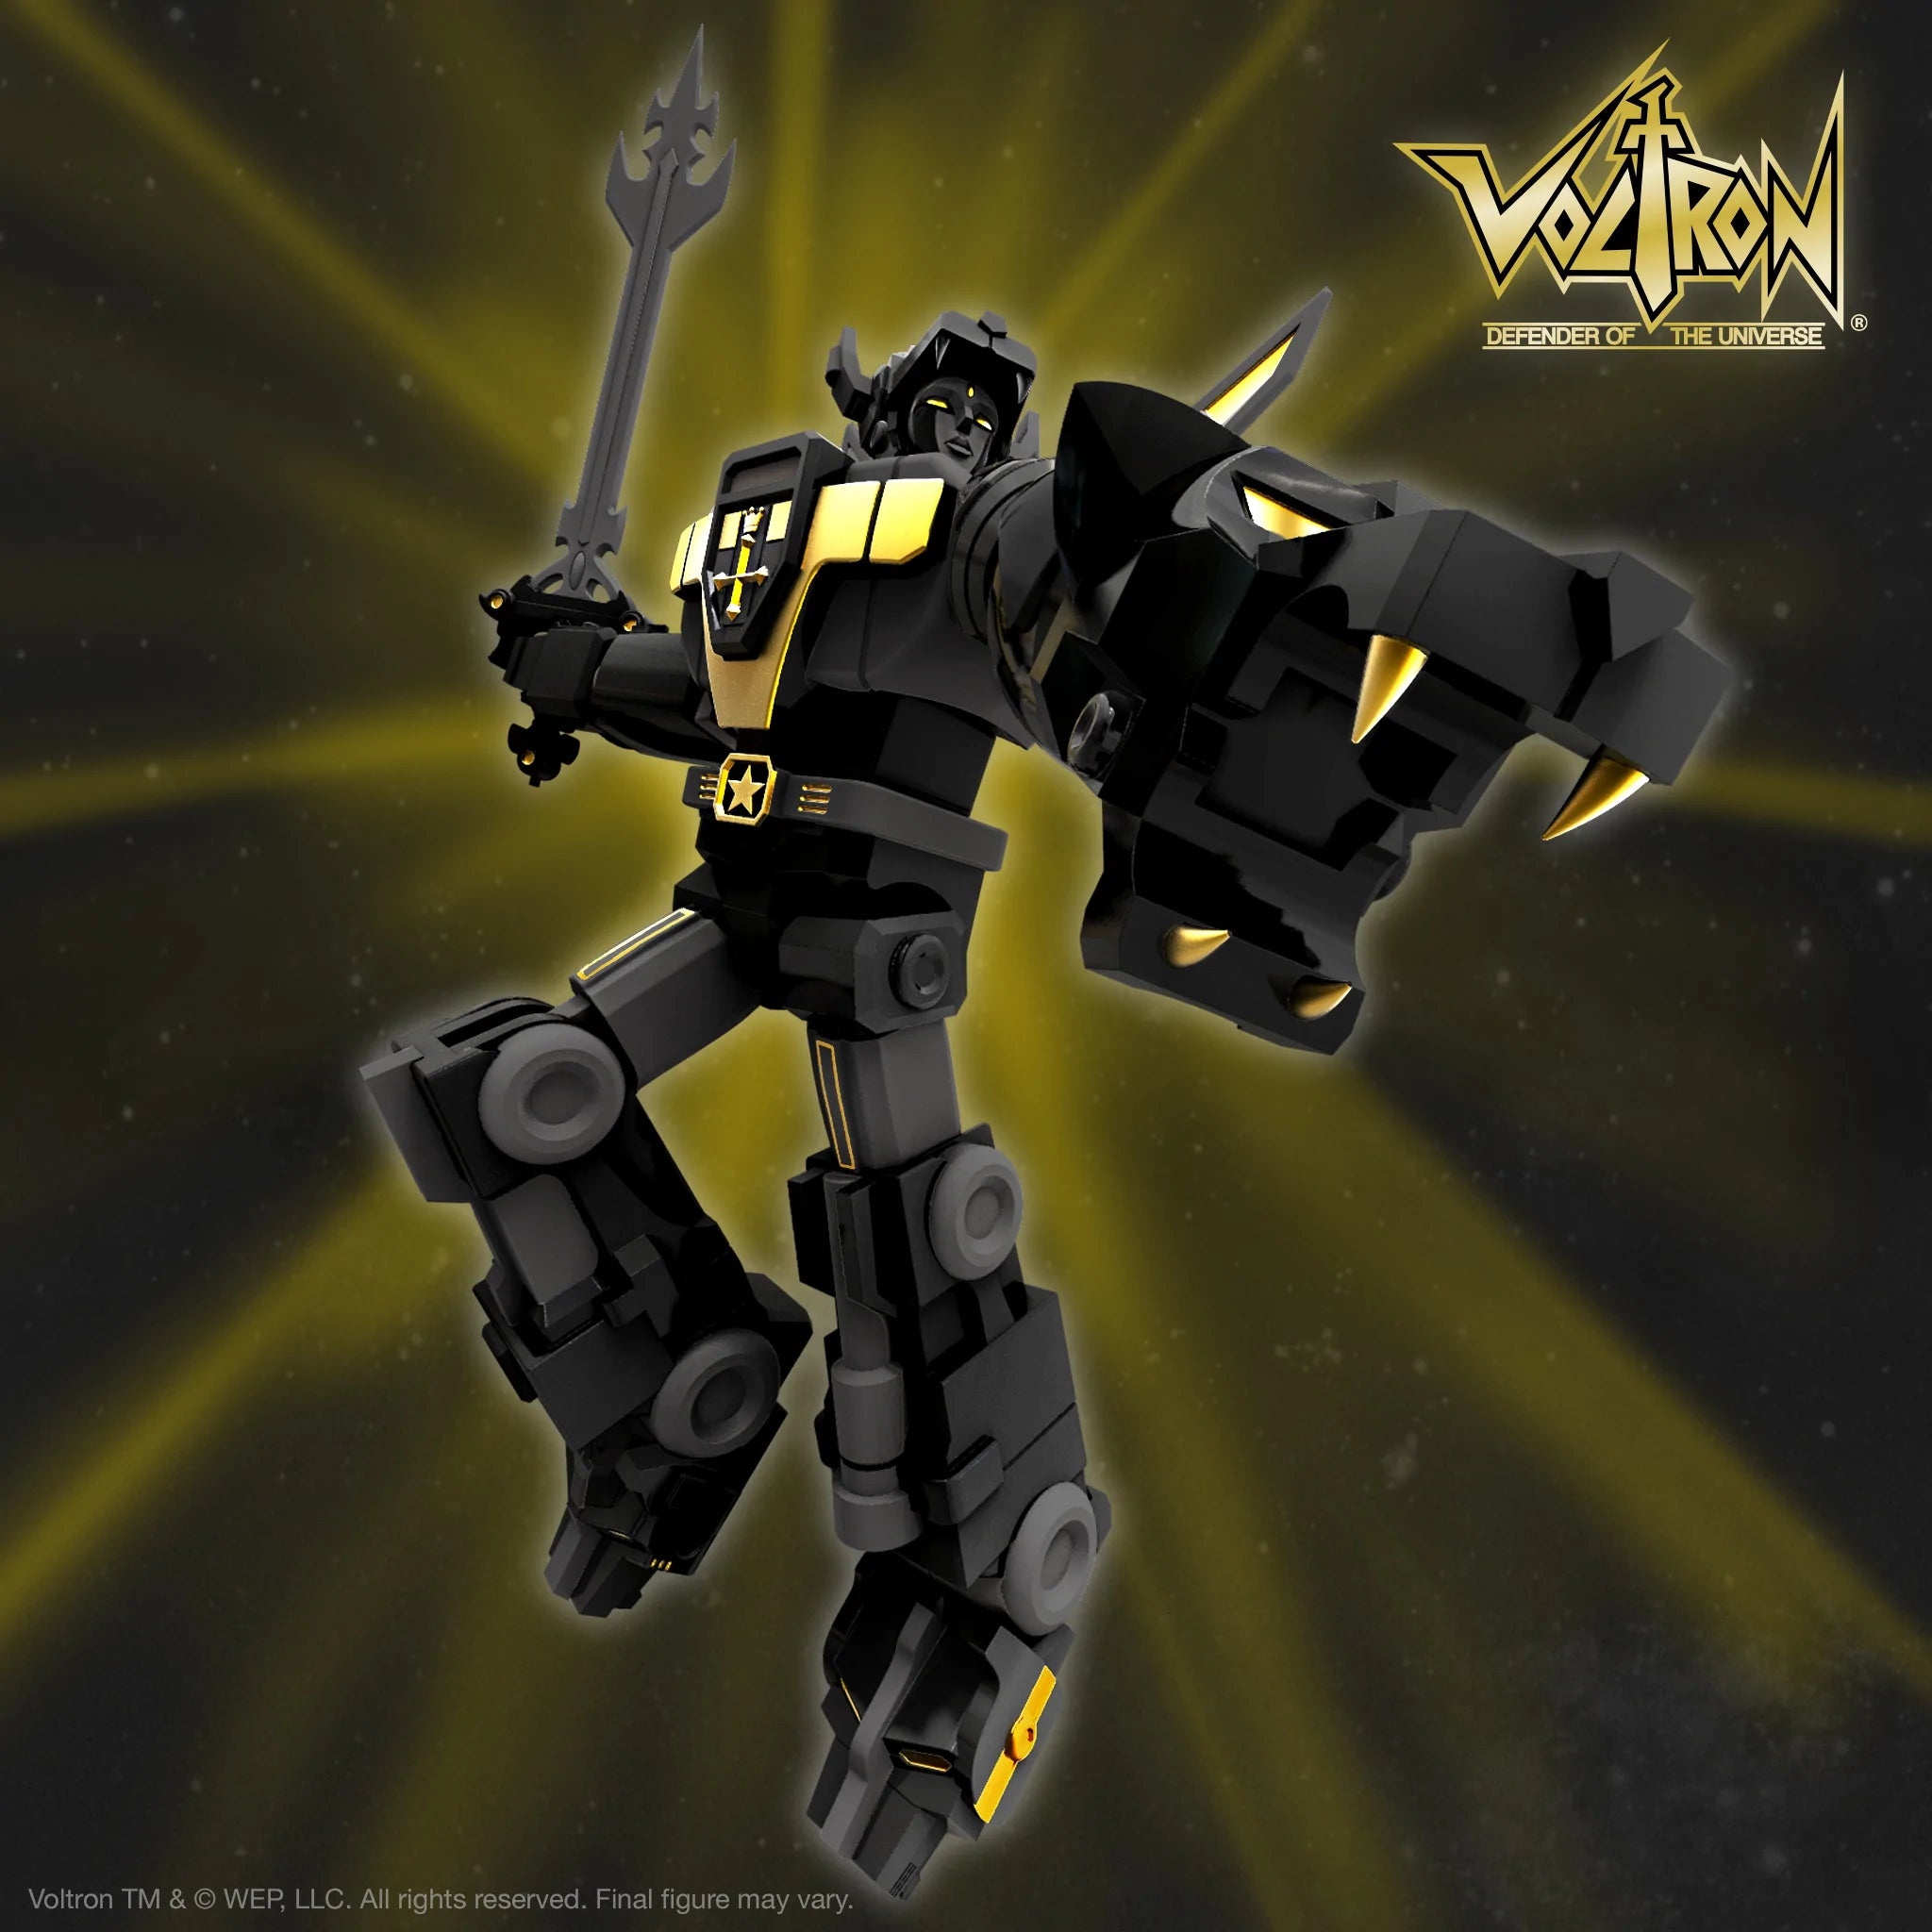 Super7 - Voltron ULTIMATES! - Defender of the Universe (Galaxy Black) - Marvelous Toys